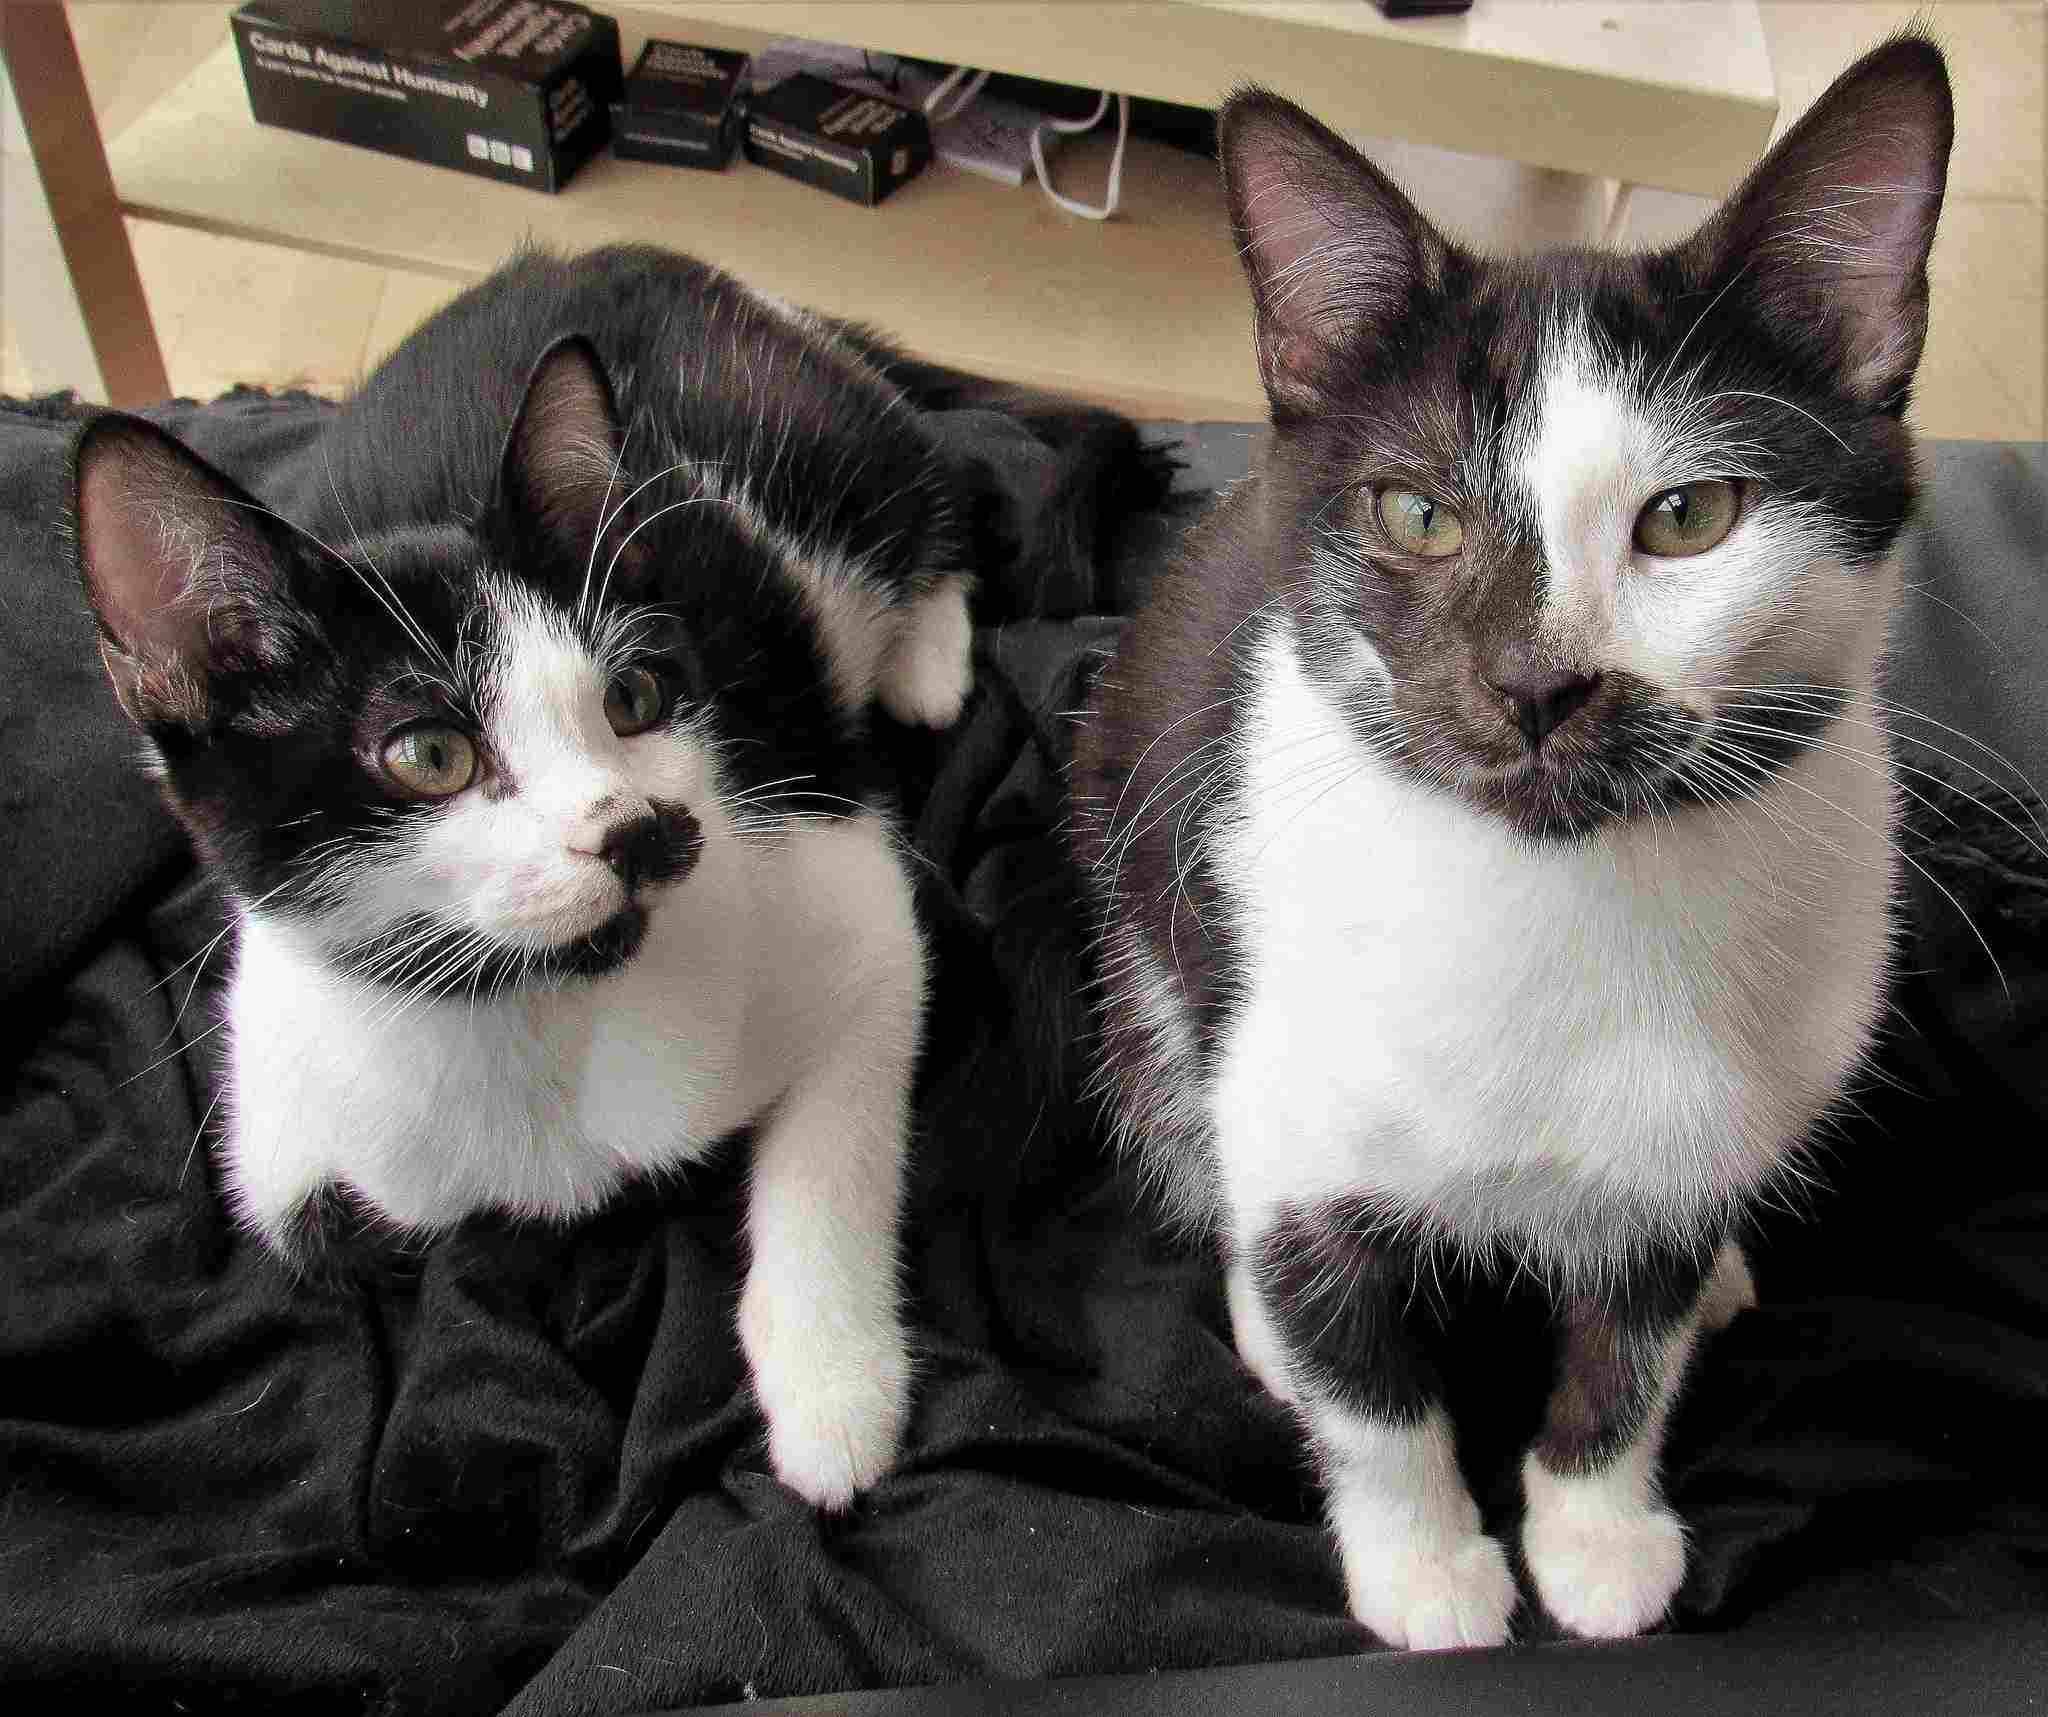 two black and white cats sitting on a black blanket.